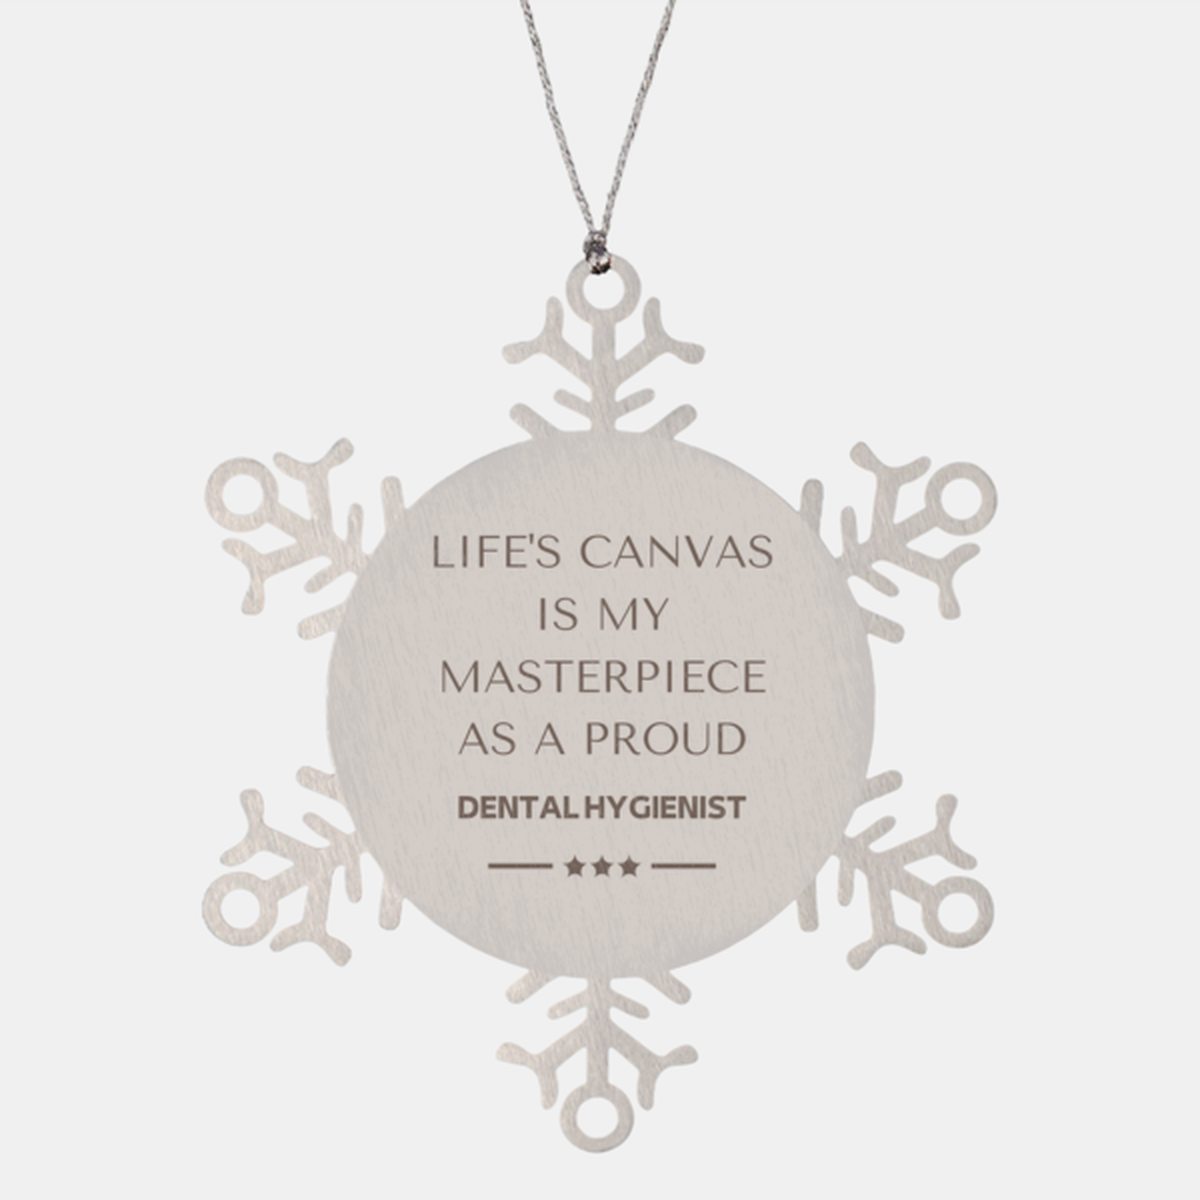 Proud Dental Hygienist Gifts, Life's canvas is my masterpiece, Epic Birthday Christmas Unique Snowflake Ornament For Dental Hygienist, Coworkers, Men, Women, Friends